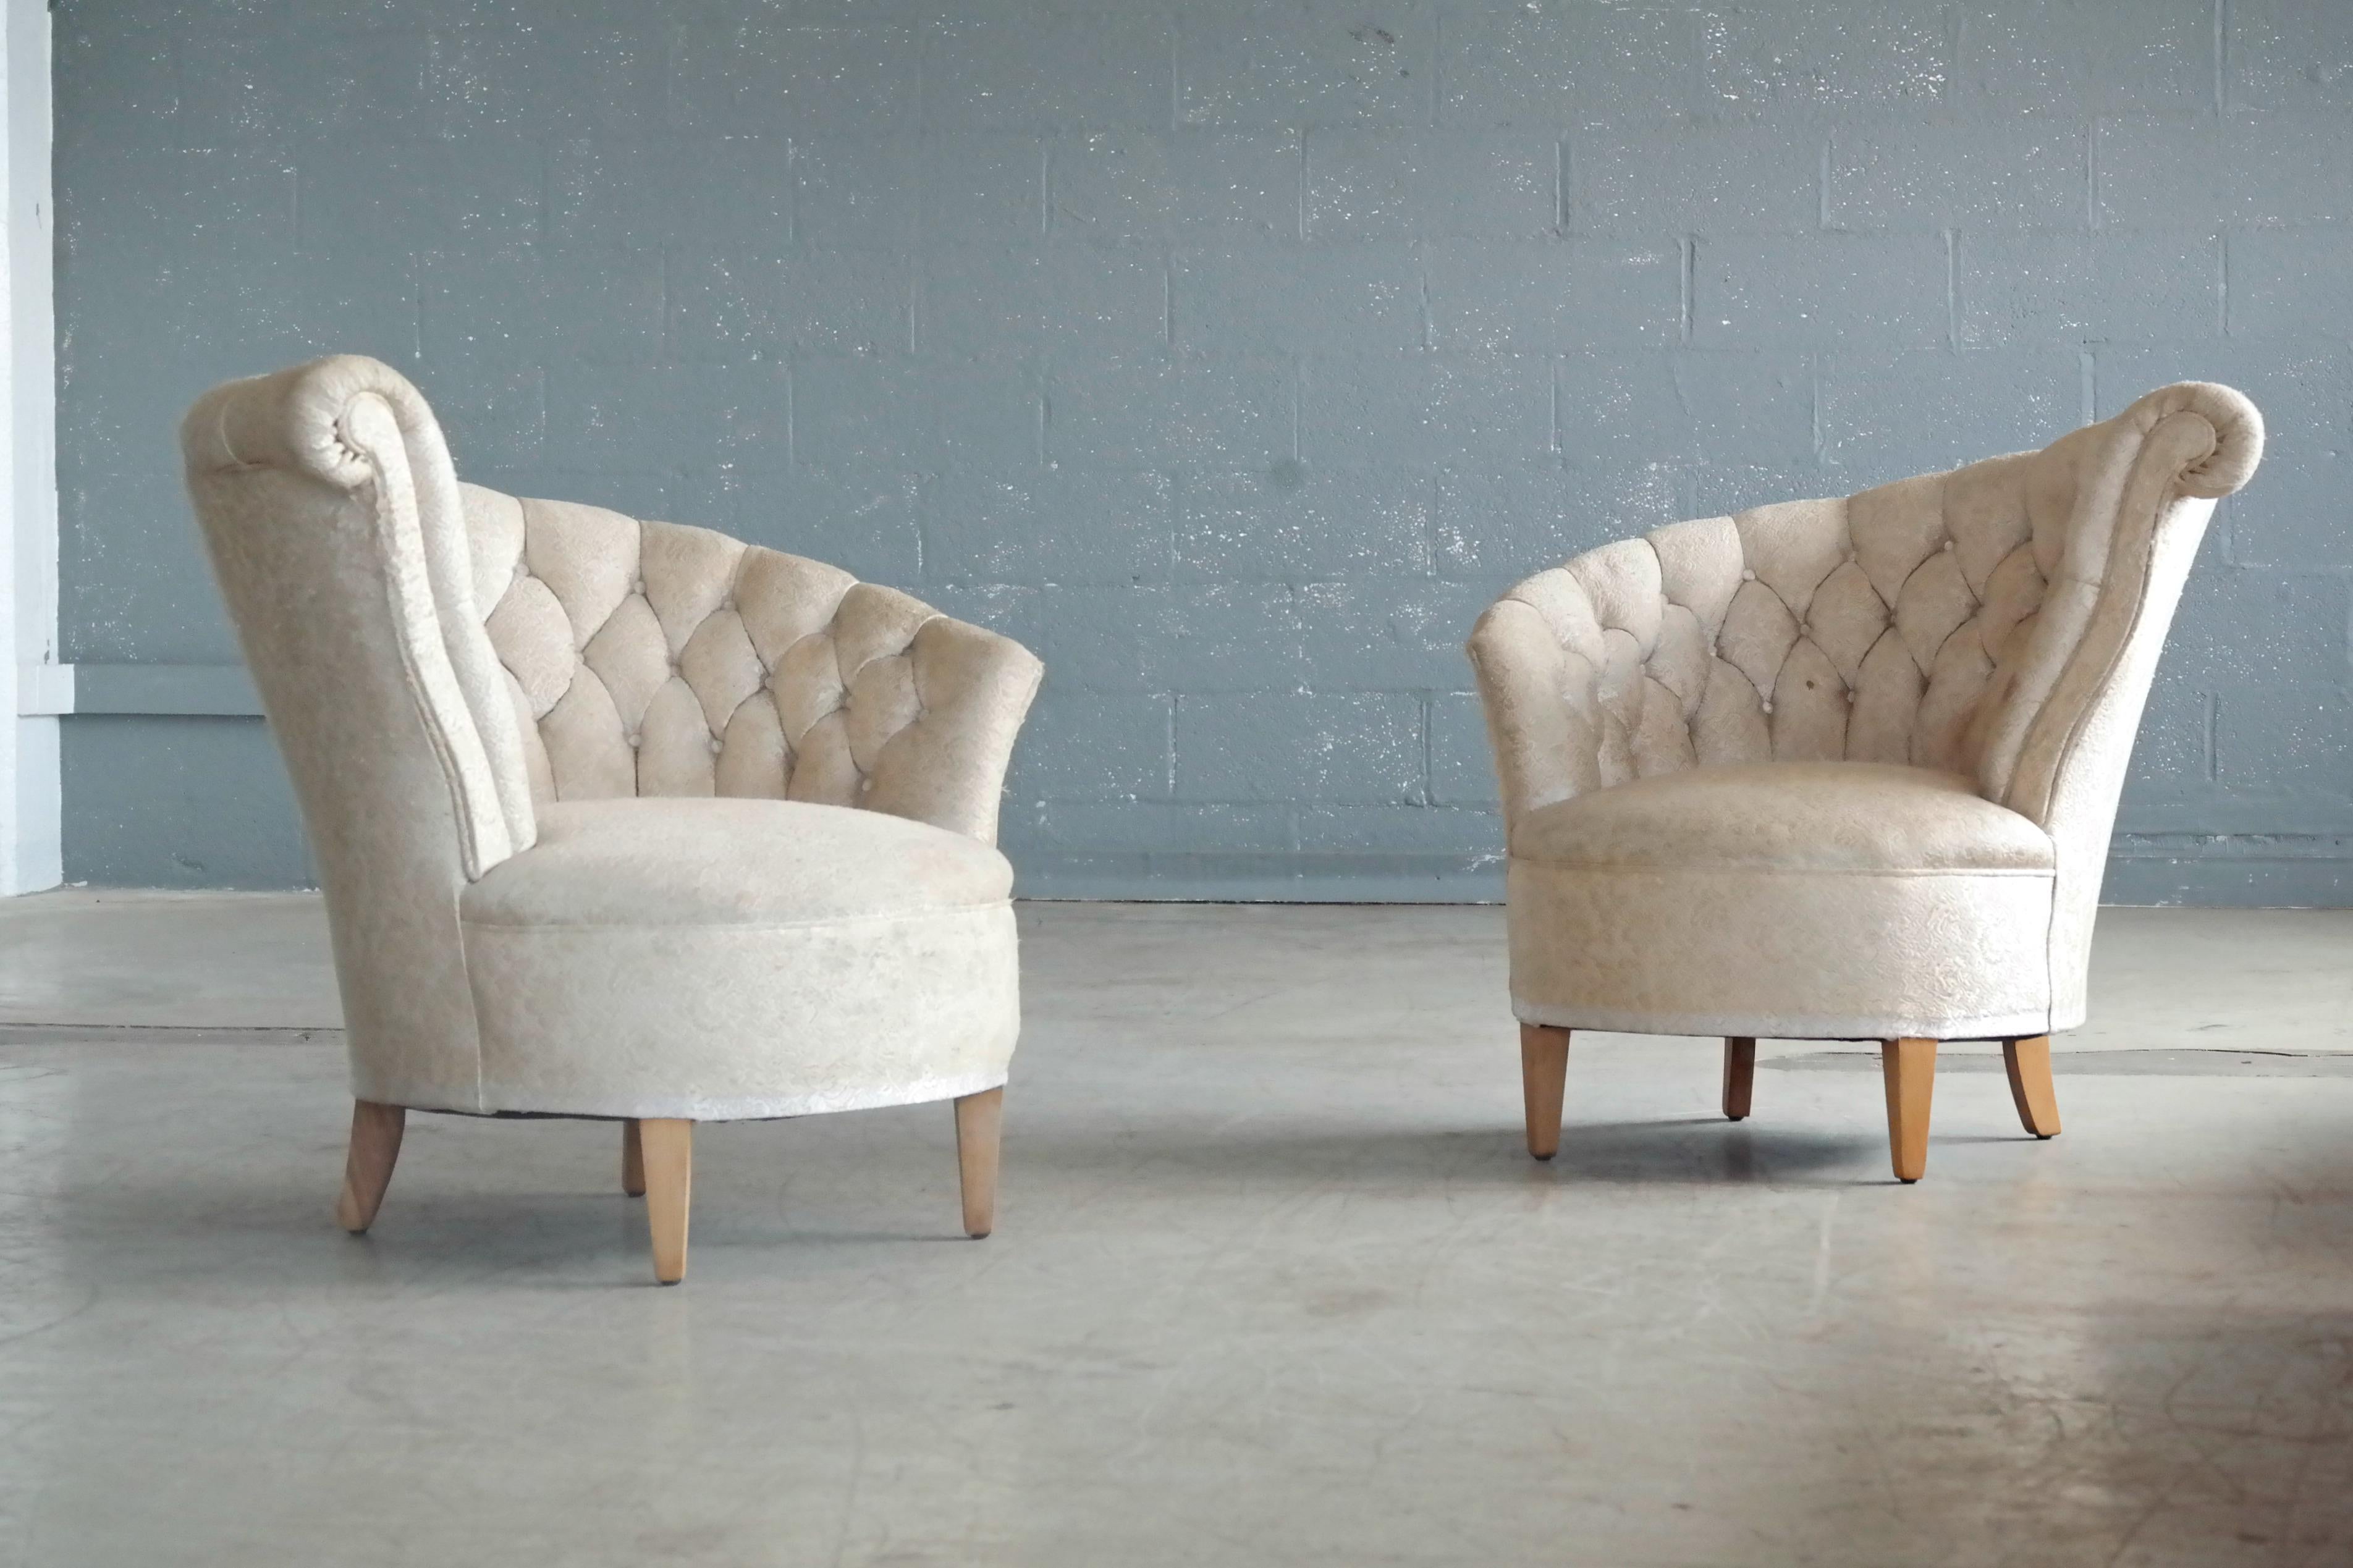 Whimsical and glamorous pair of 1940s Hollywood Regency style lounge chairs. The chairs have a circular design when seen from above and the backs of each chair feature an asymmetrical fan back design with tufted upholstery and a slight scroll detail